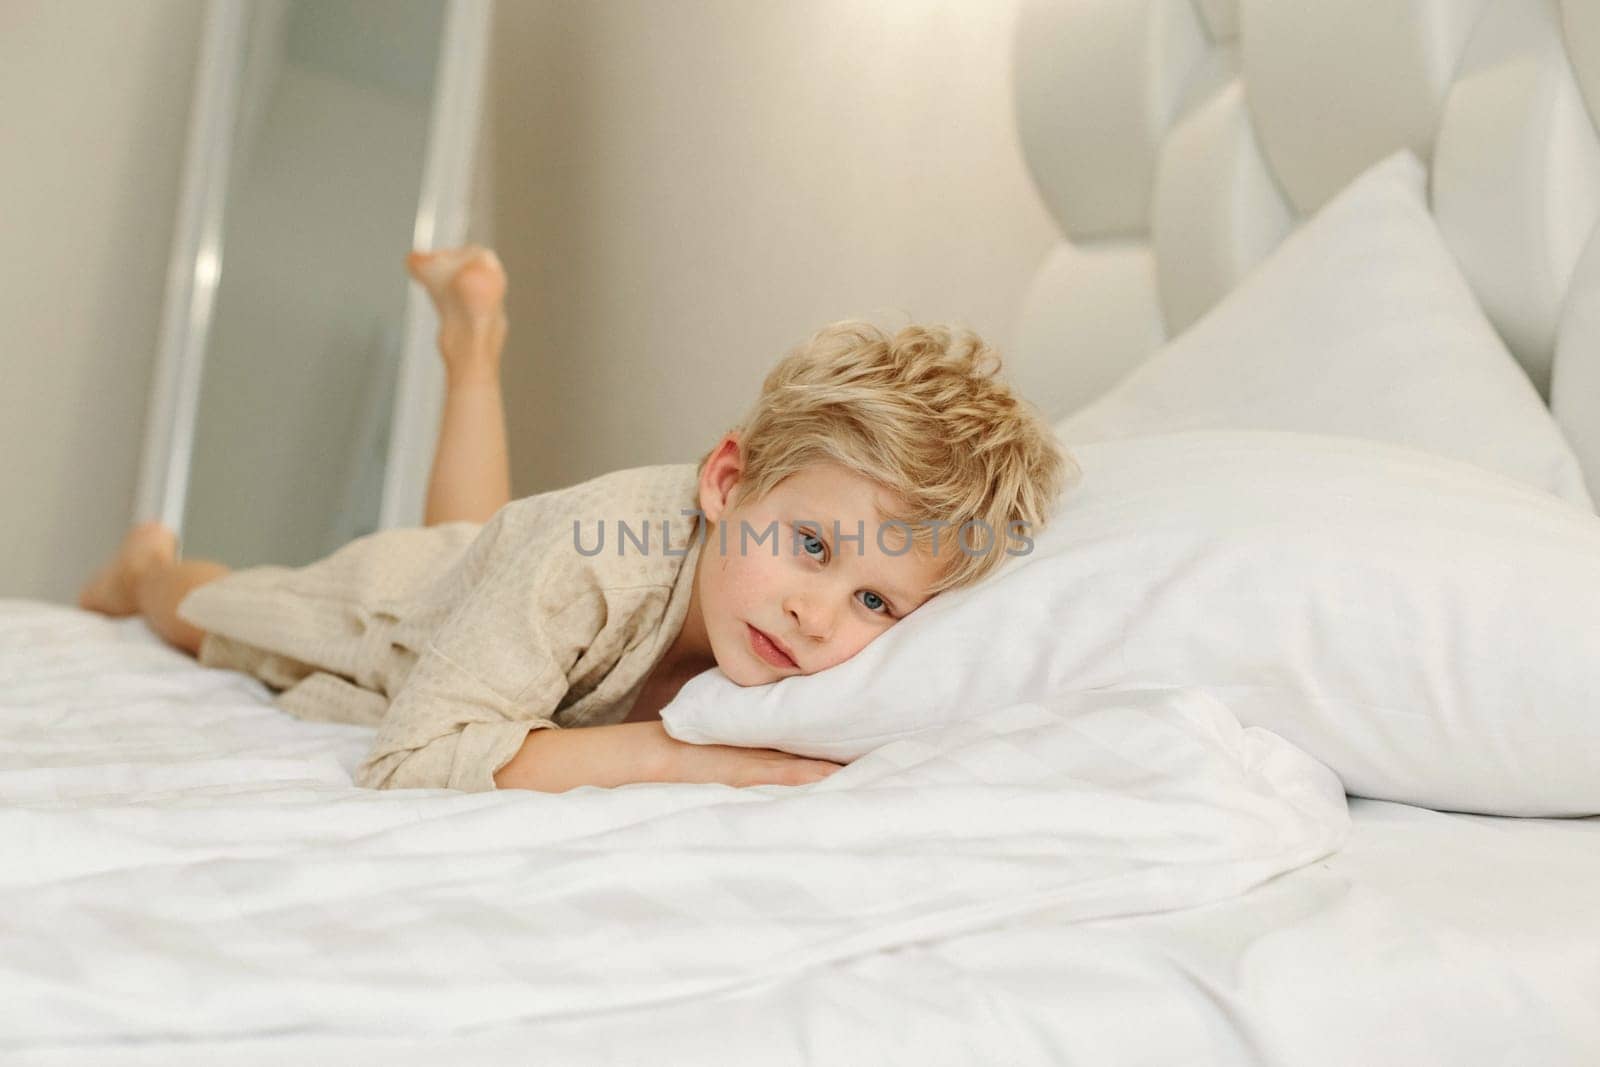 Portrait of a boy in a bathrobe, who lies on the bed and looks at the camera.